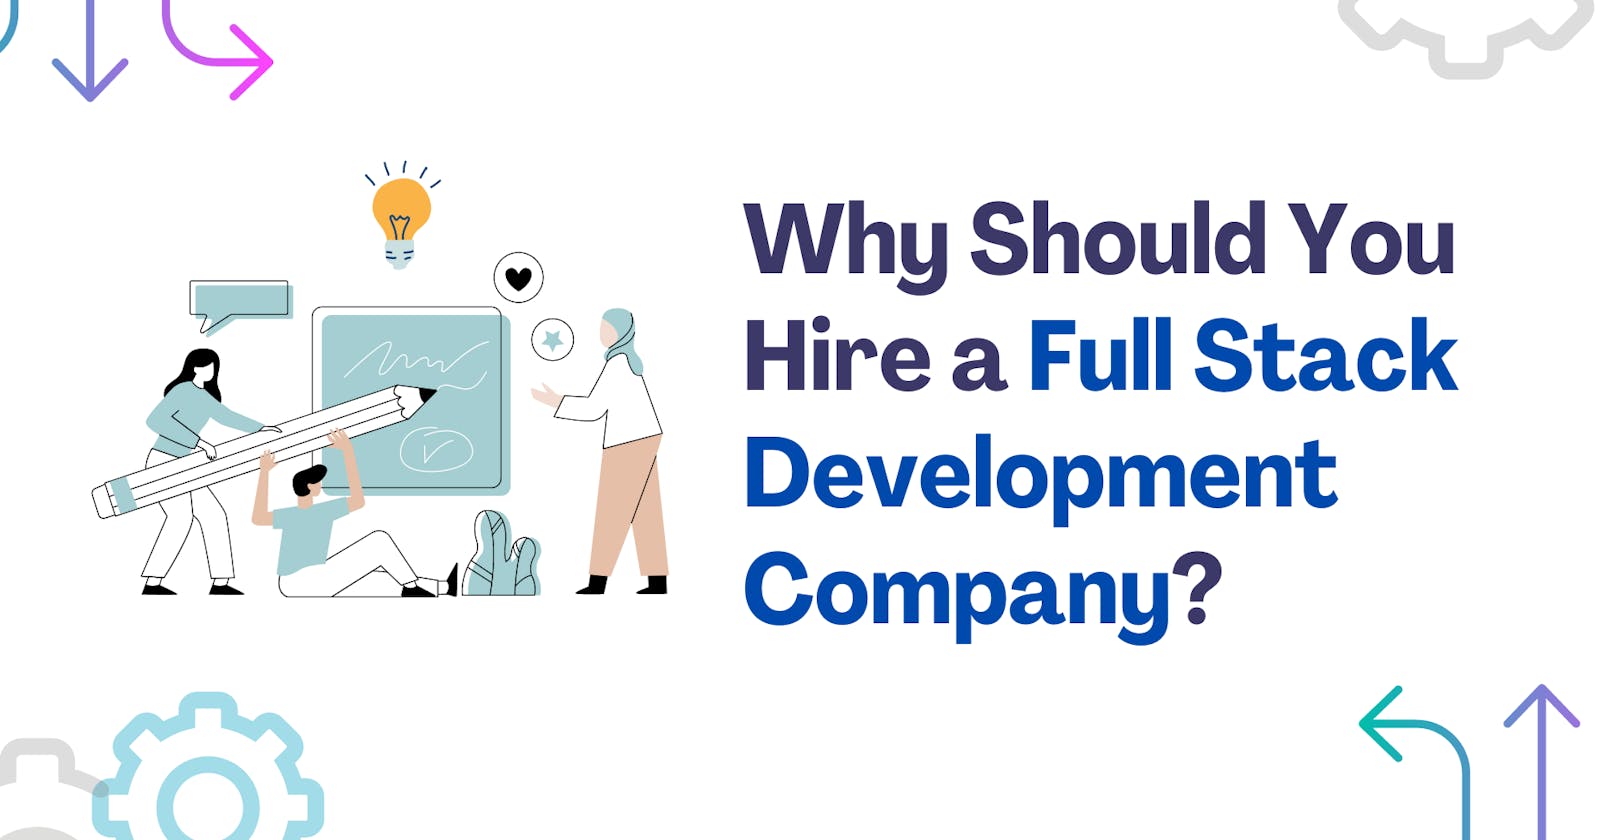 Why Should You Hire a Full Stack Development Company?